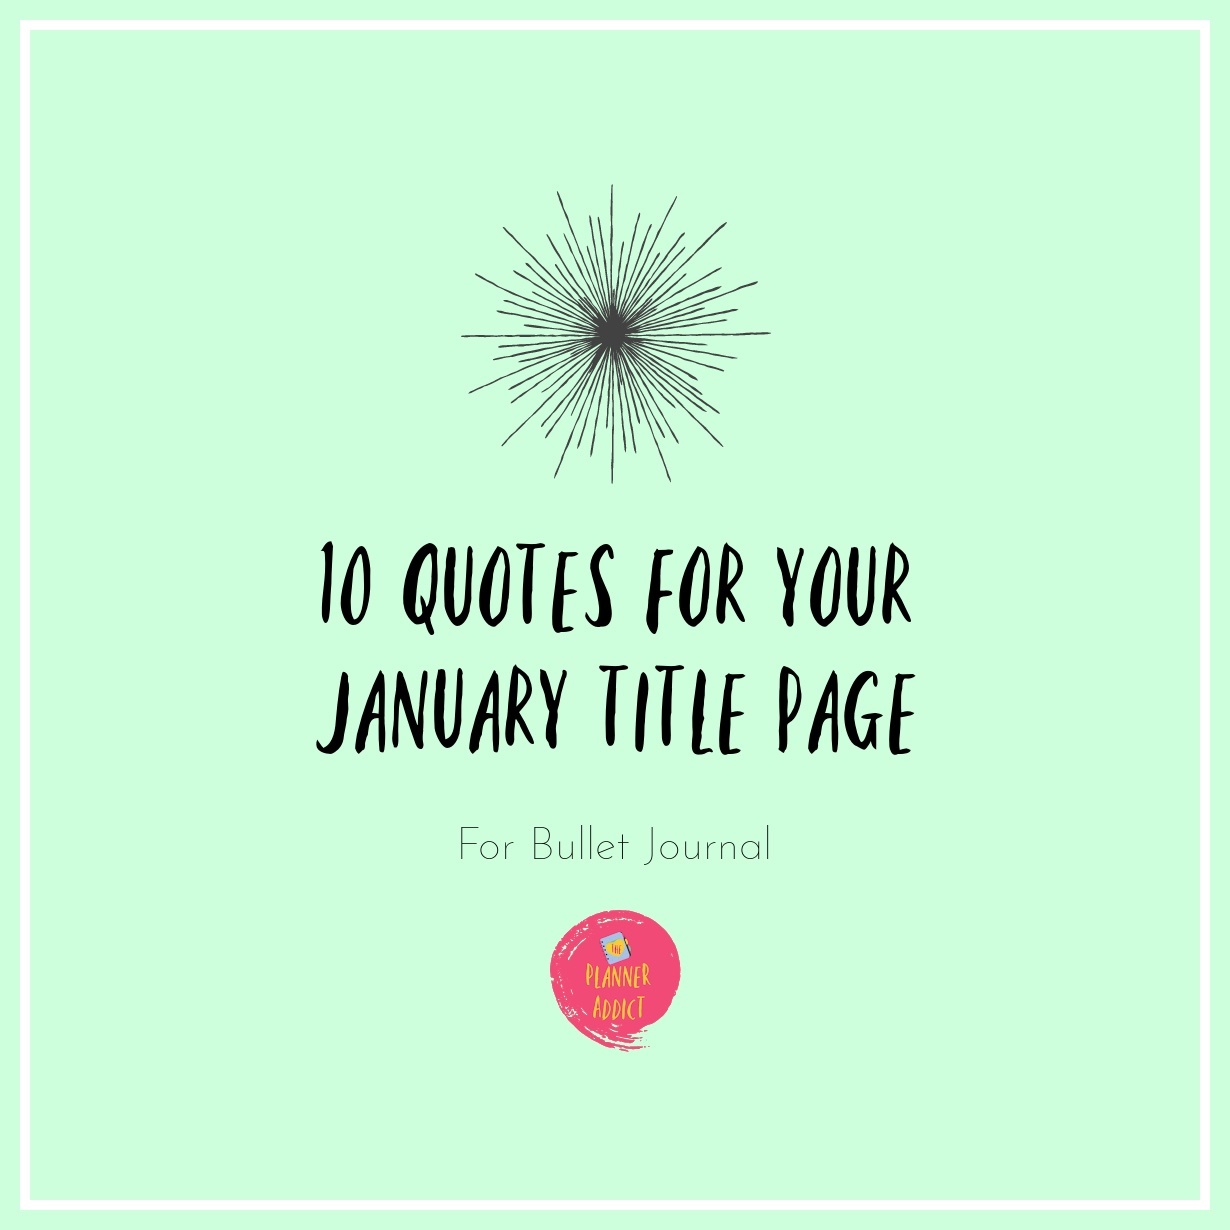 10 quotes for your january title page copy